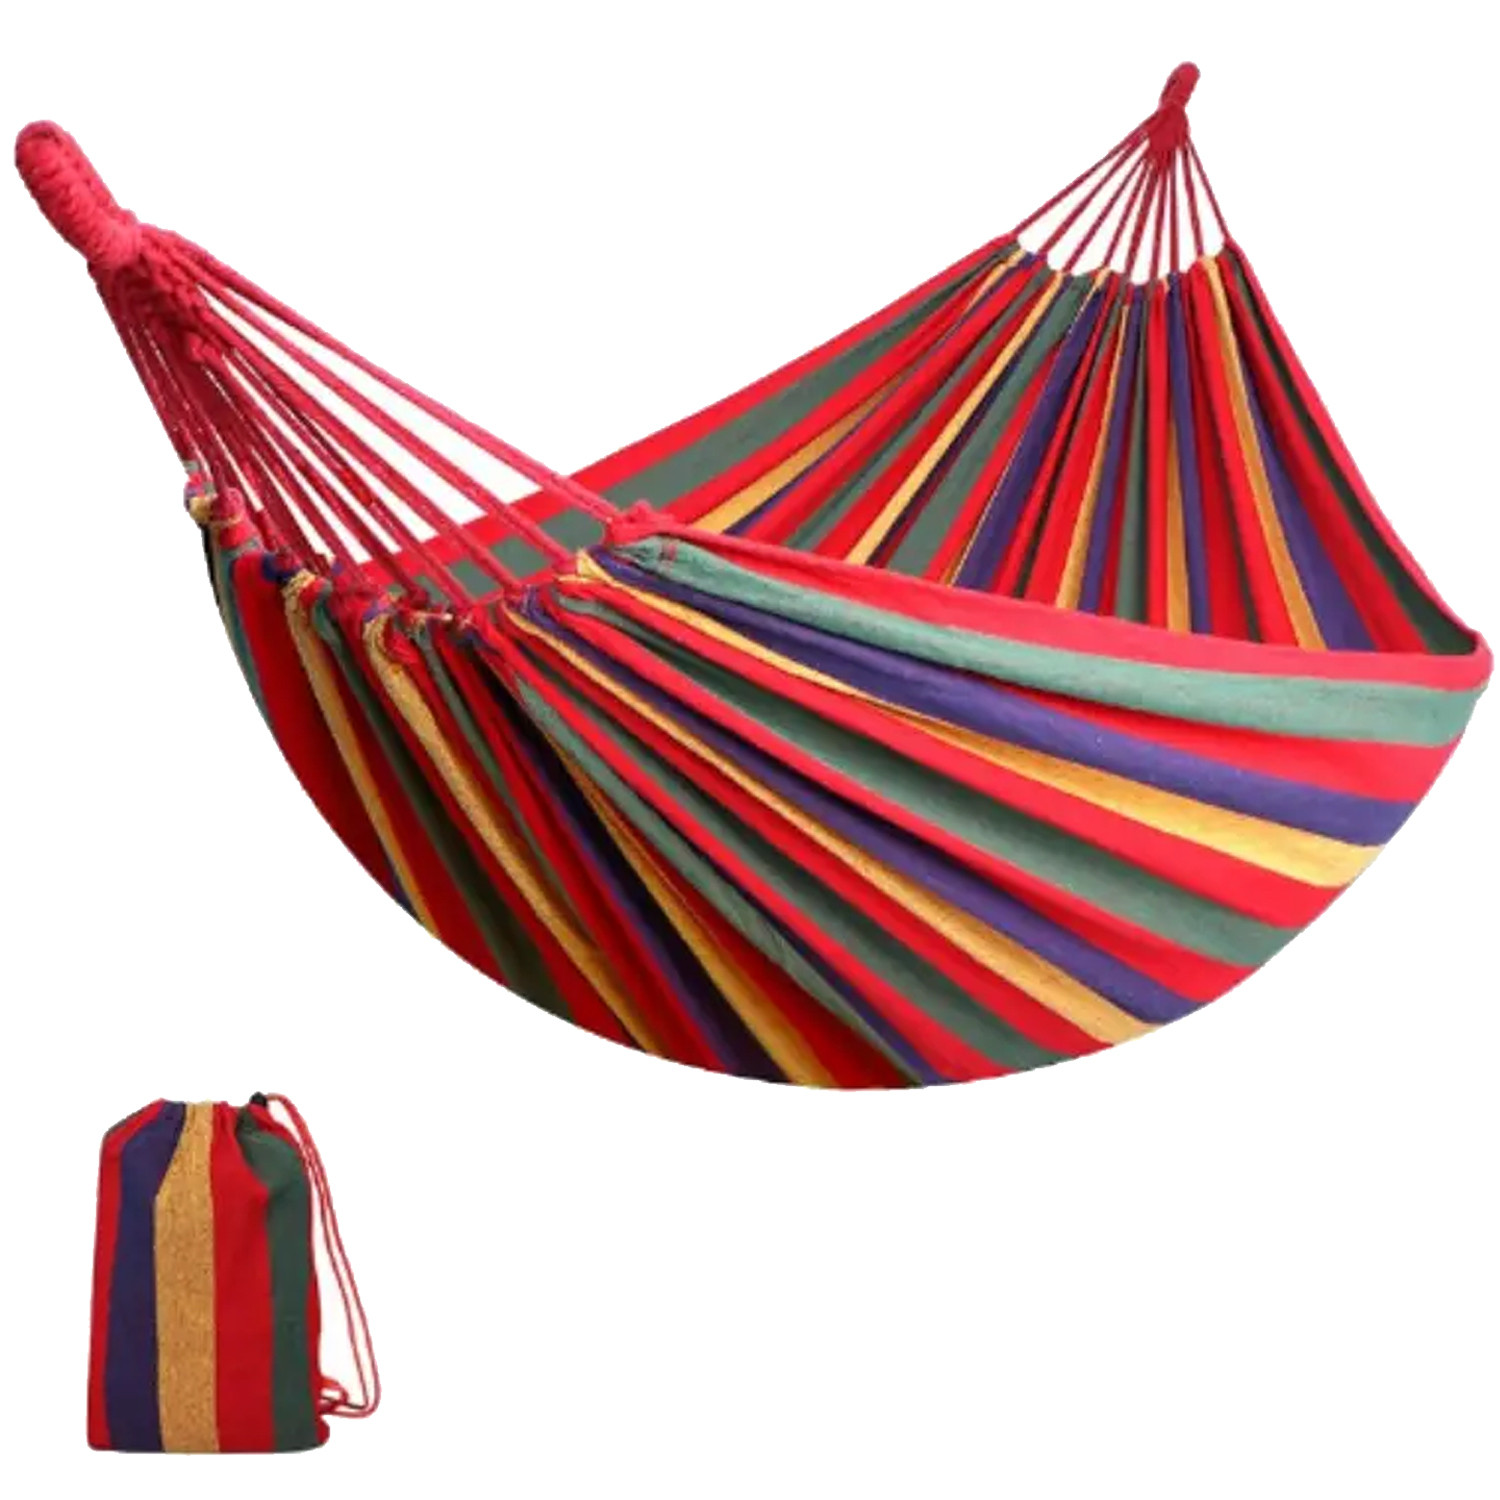 Kuber Industries Canvas Travel Hammock |Garden Hammock Swing For Adults|130 KG Load Bearing Capicity|Including 2 Rope, 1 Bag (Red & Yellow)